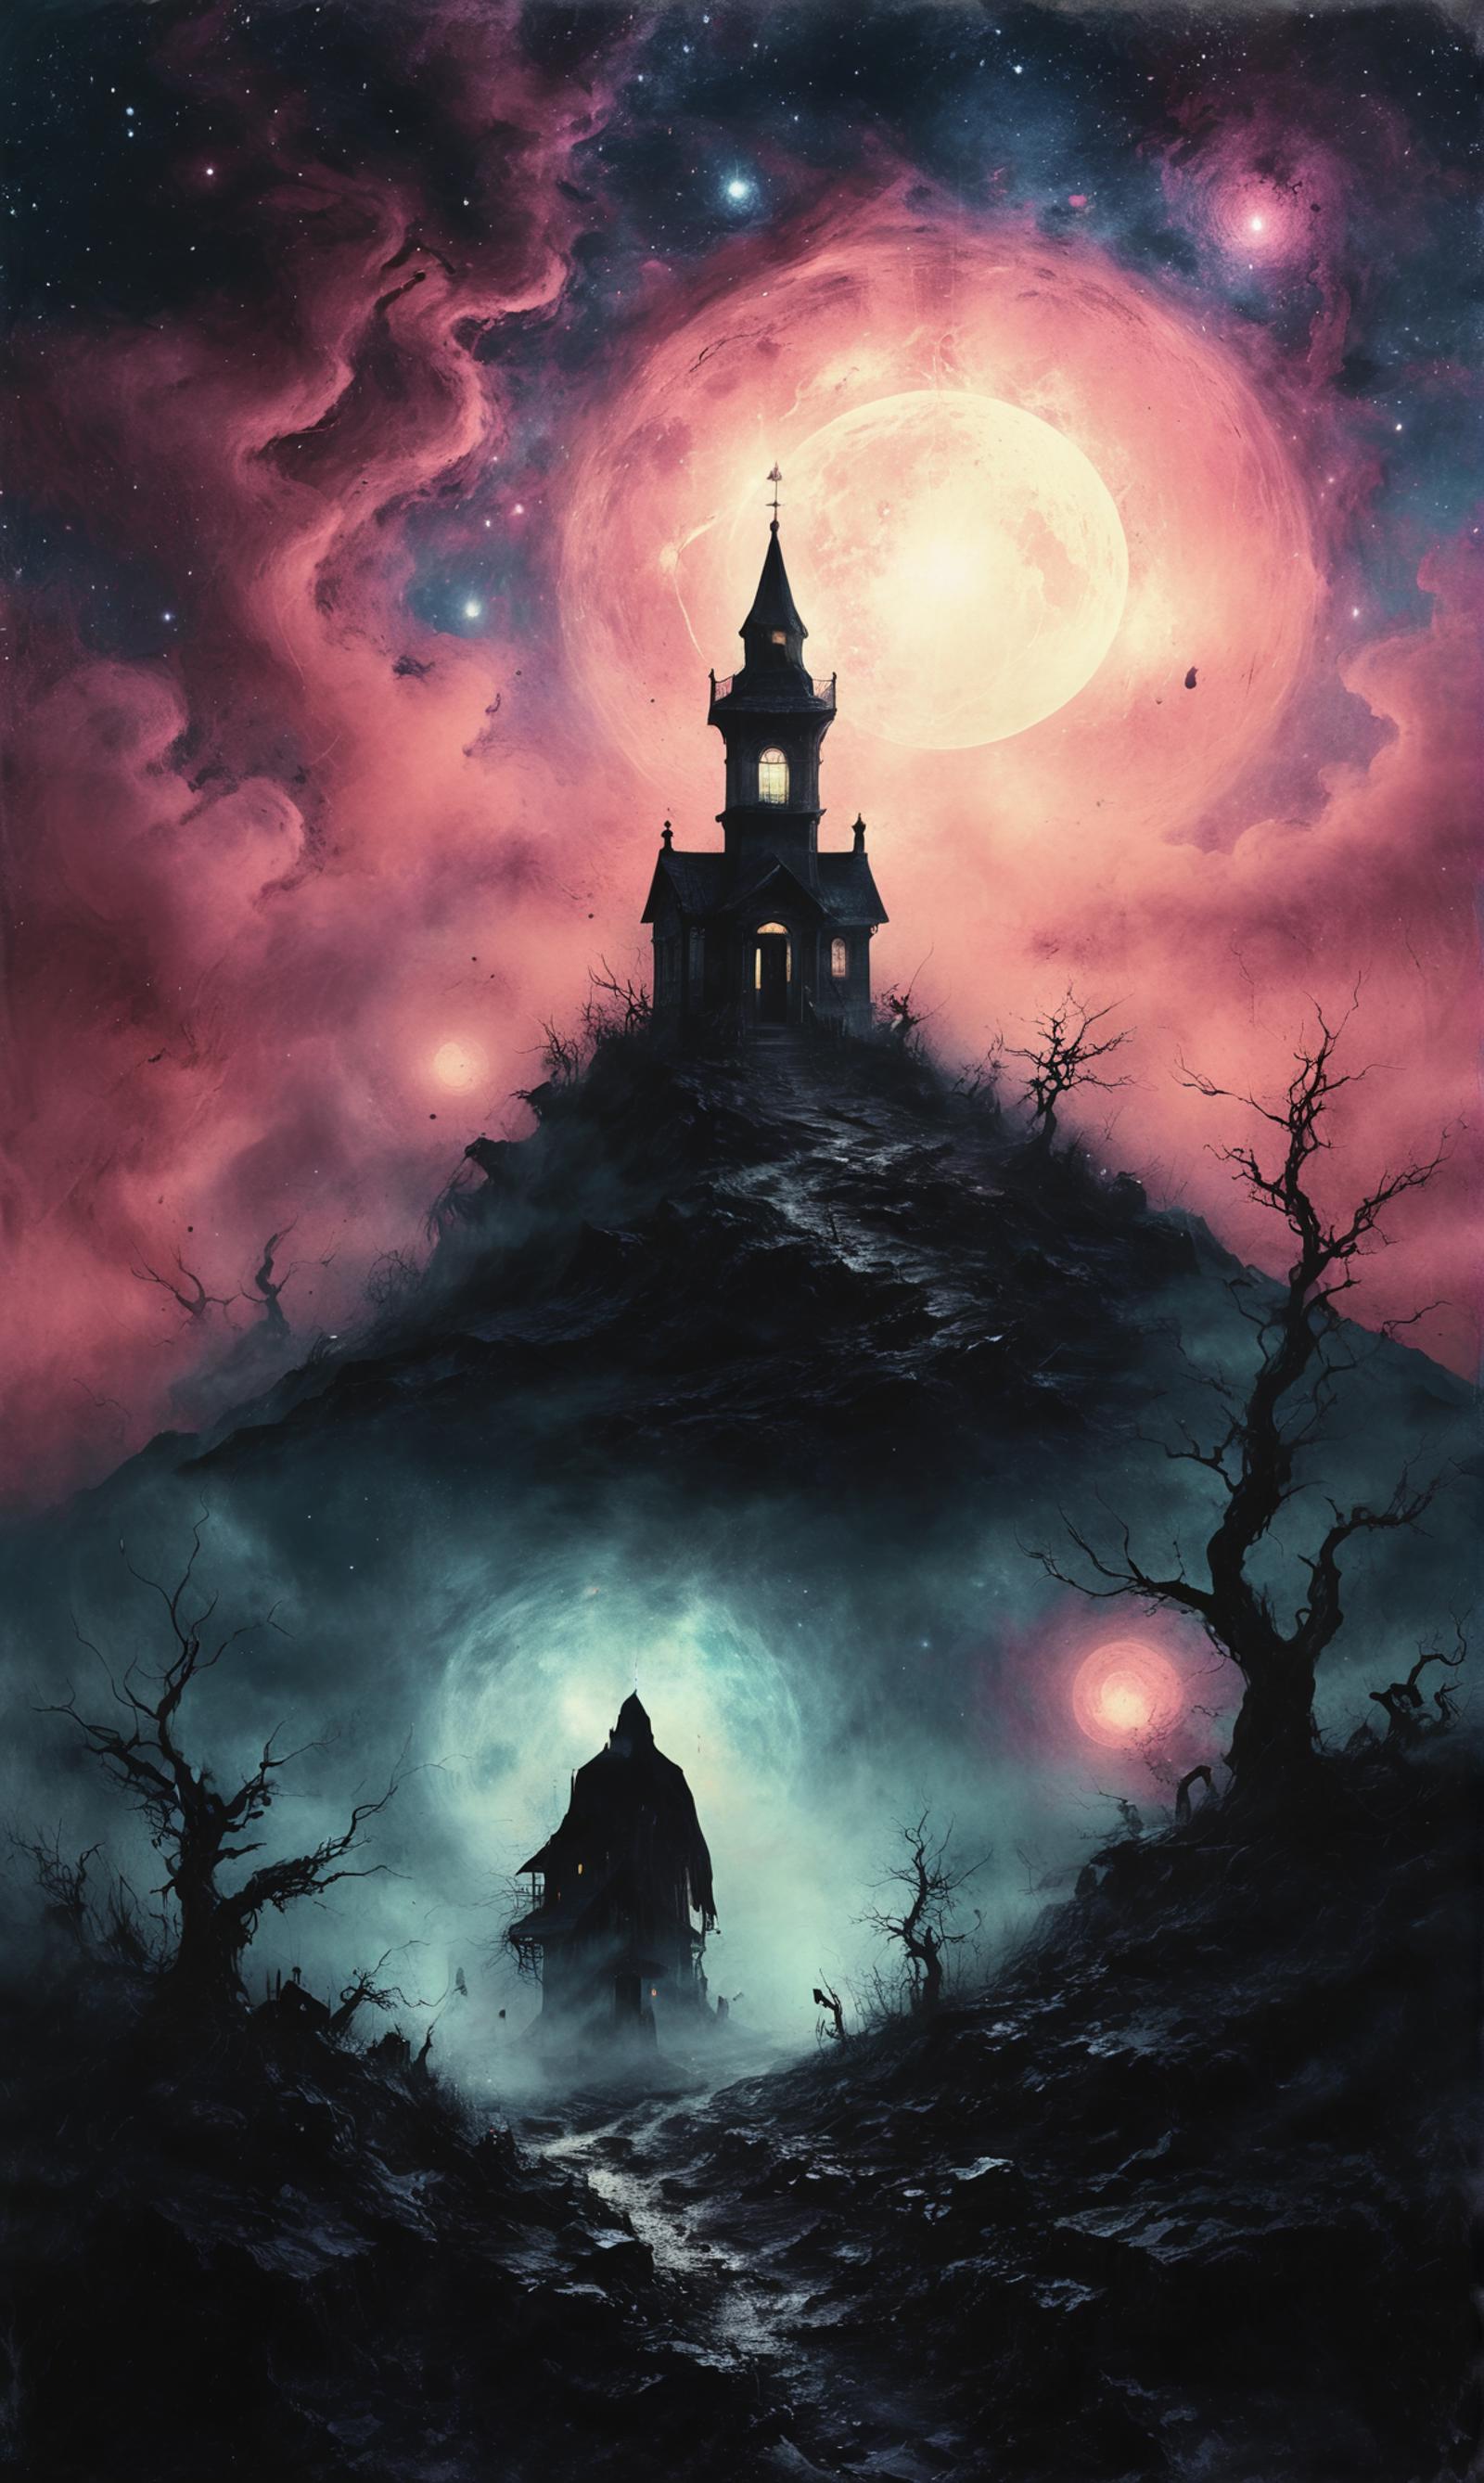 A Moonlit Night with a Haunted Castle and a Person Standing in the Foreground